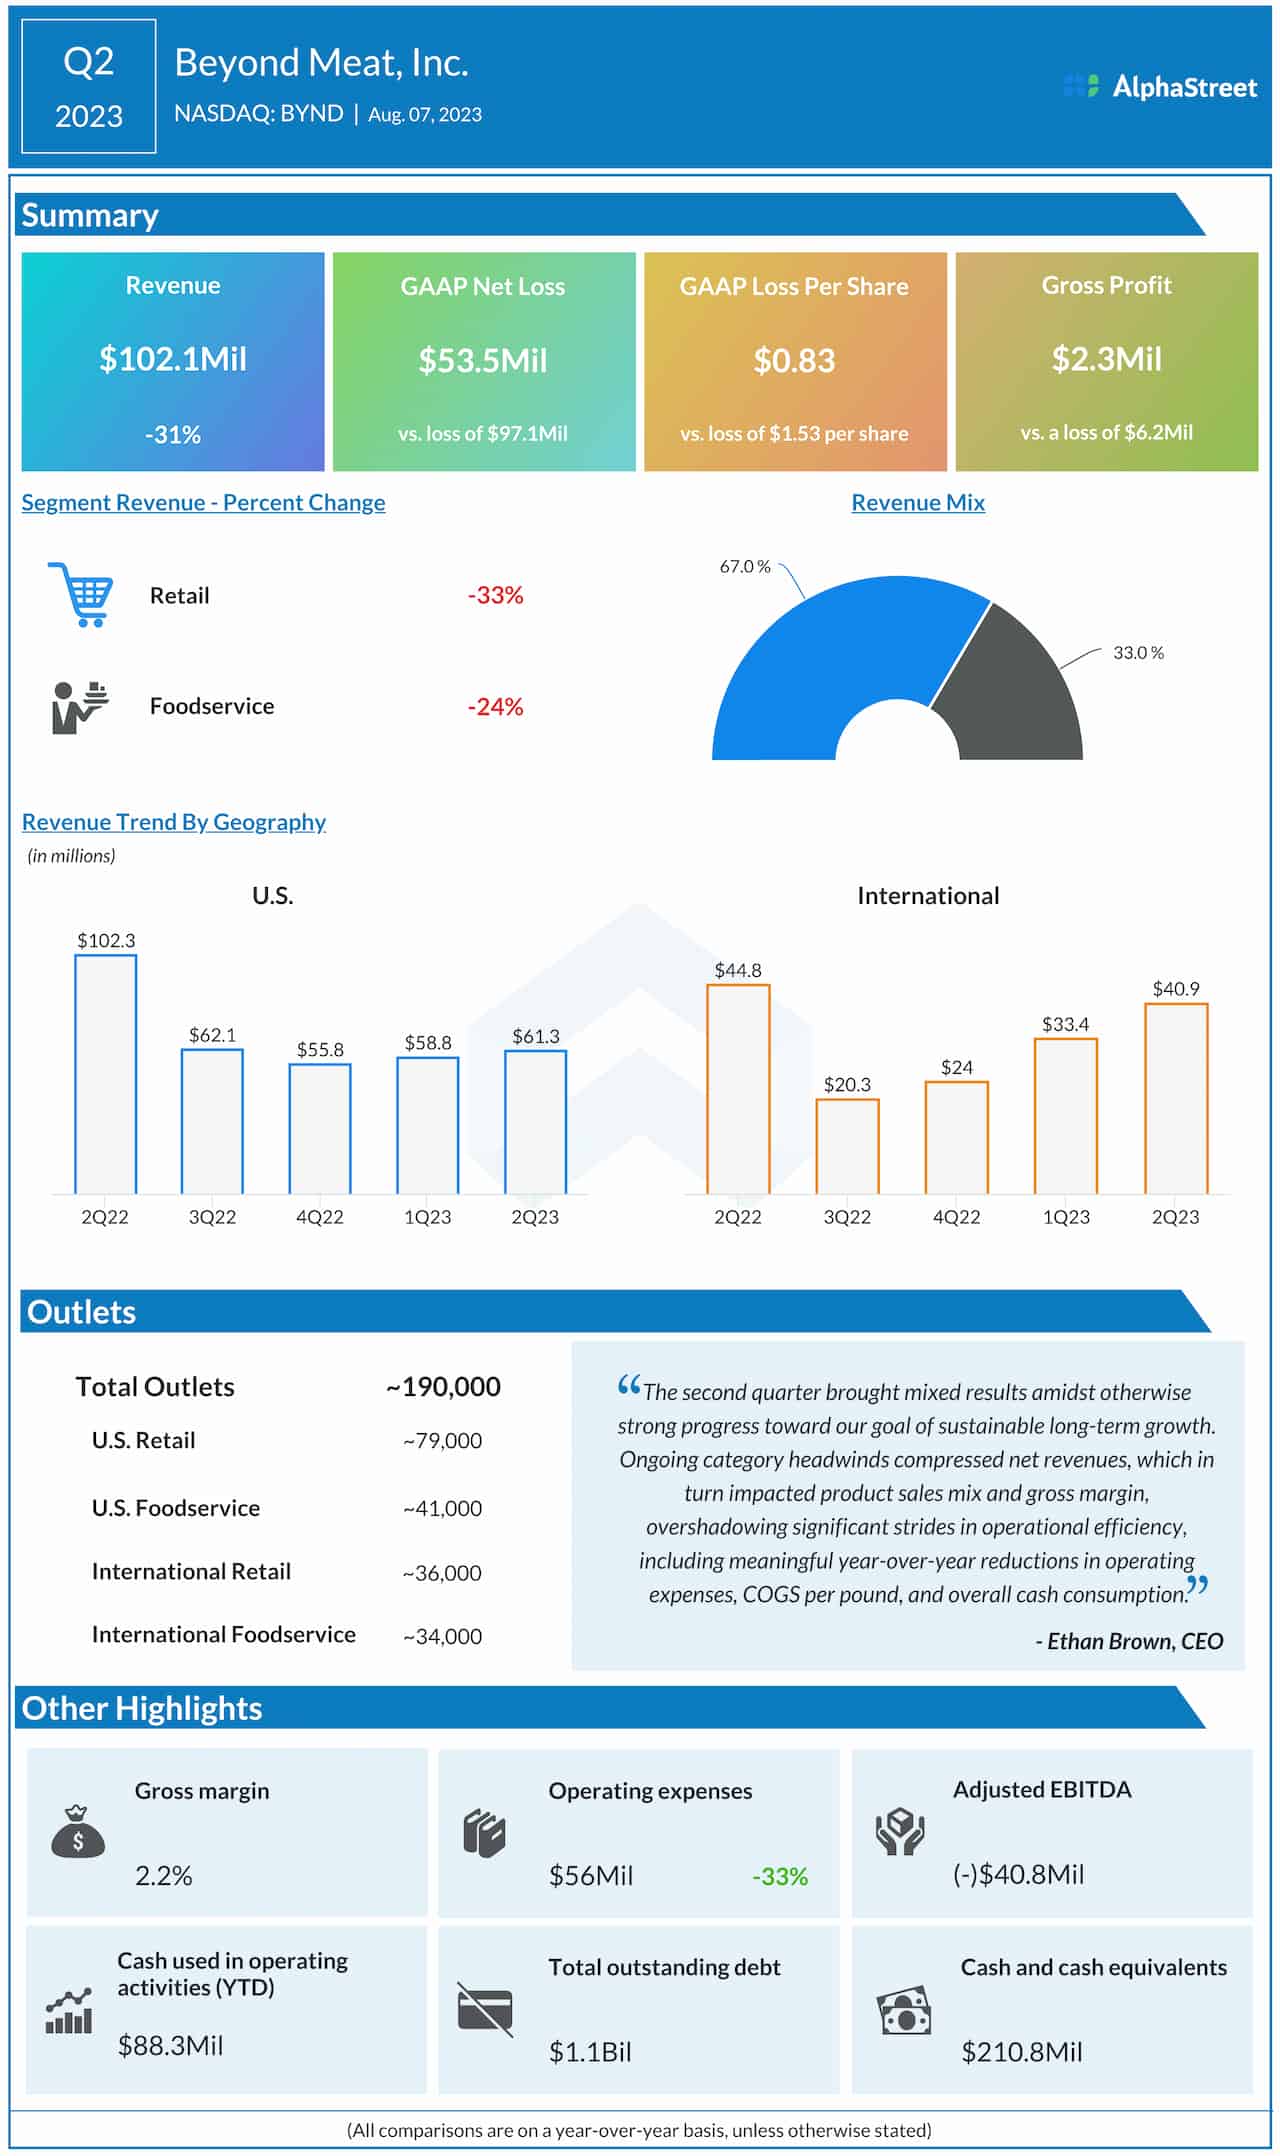 Beyond Meat Q2 2023 earnings infographic